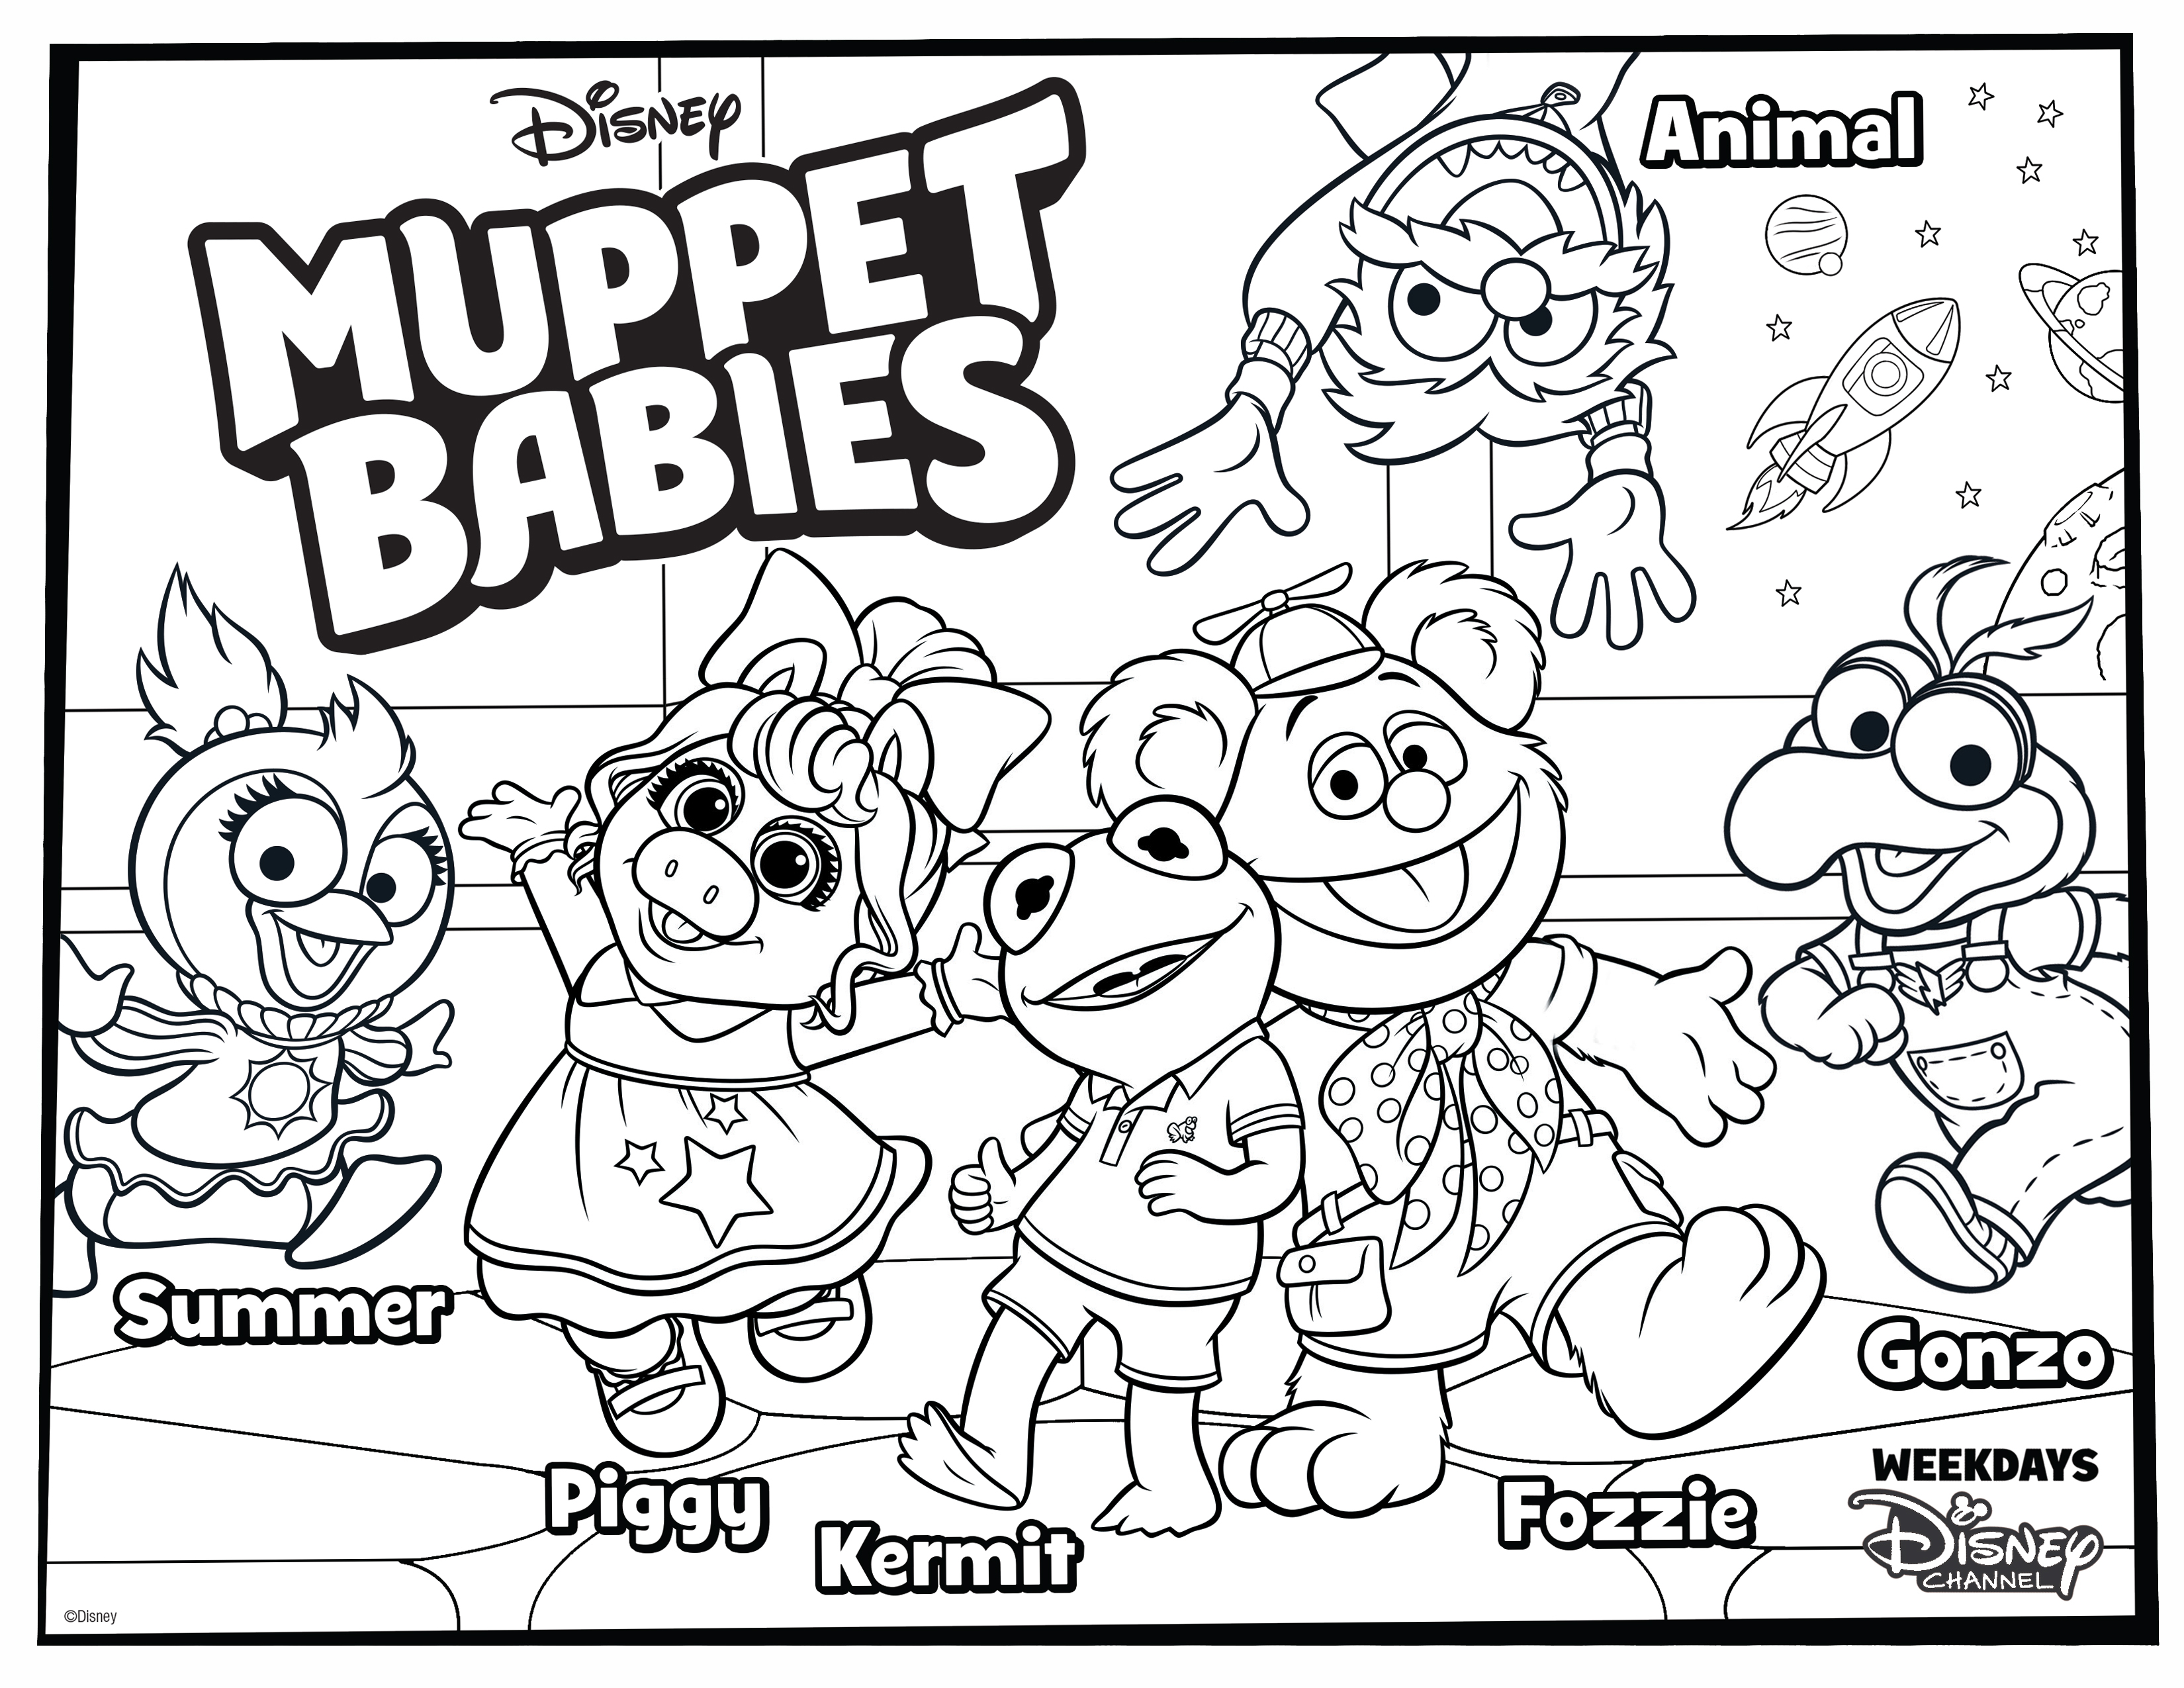 Disney.com Coloring Pages Muppet Babies Coloring Page For Your Kids Disney Family